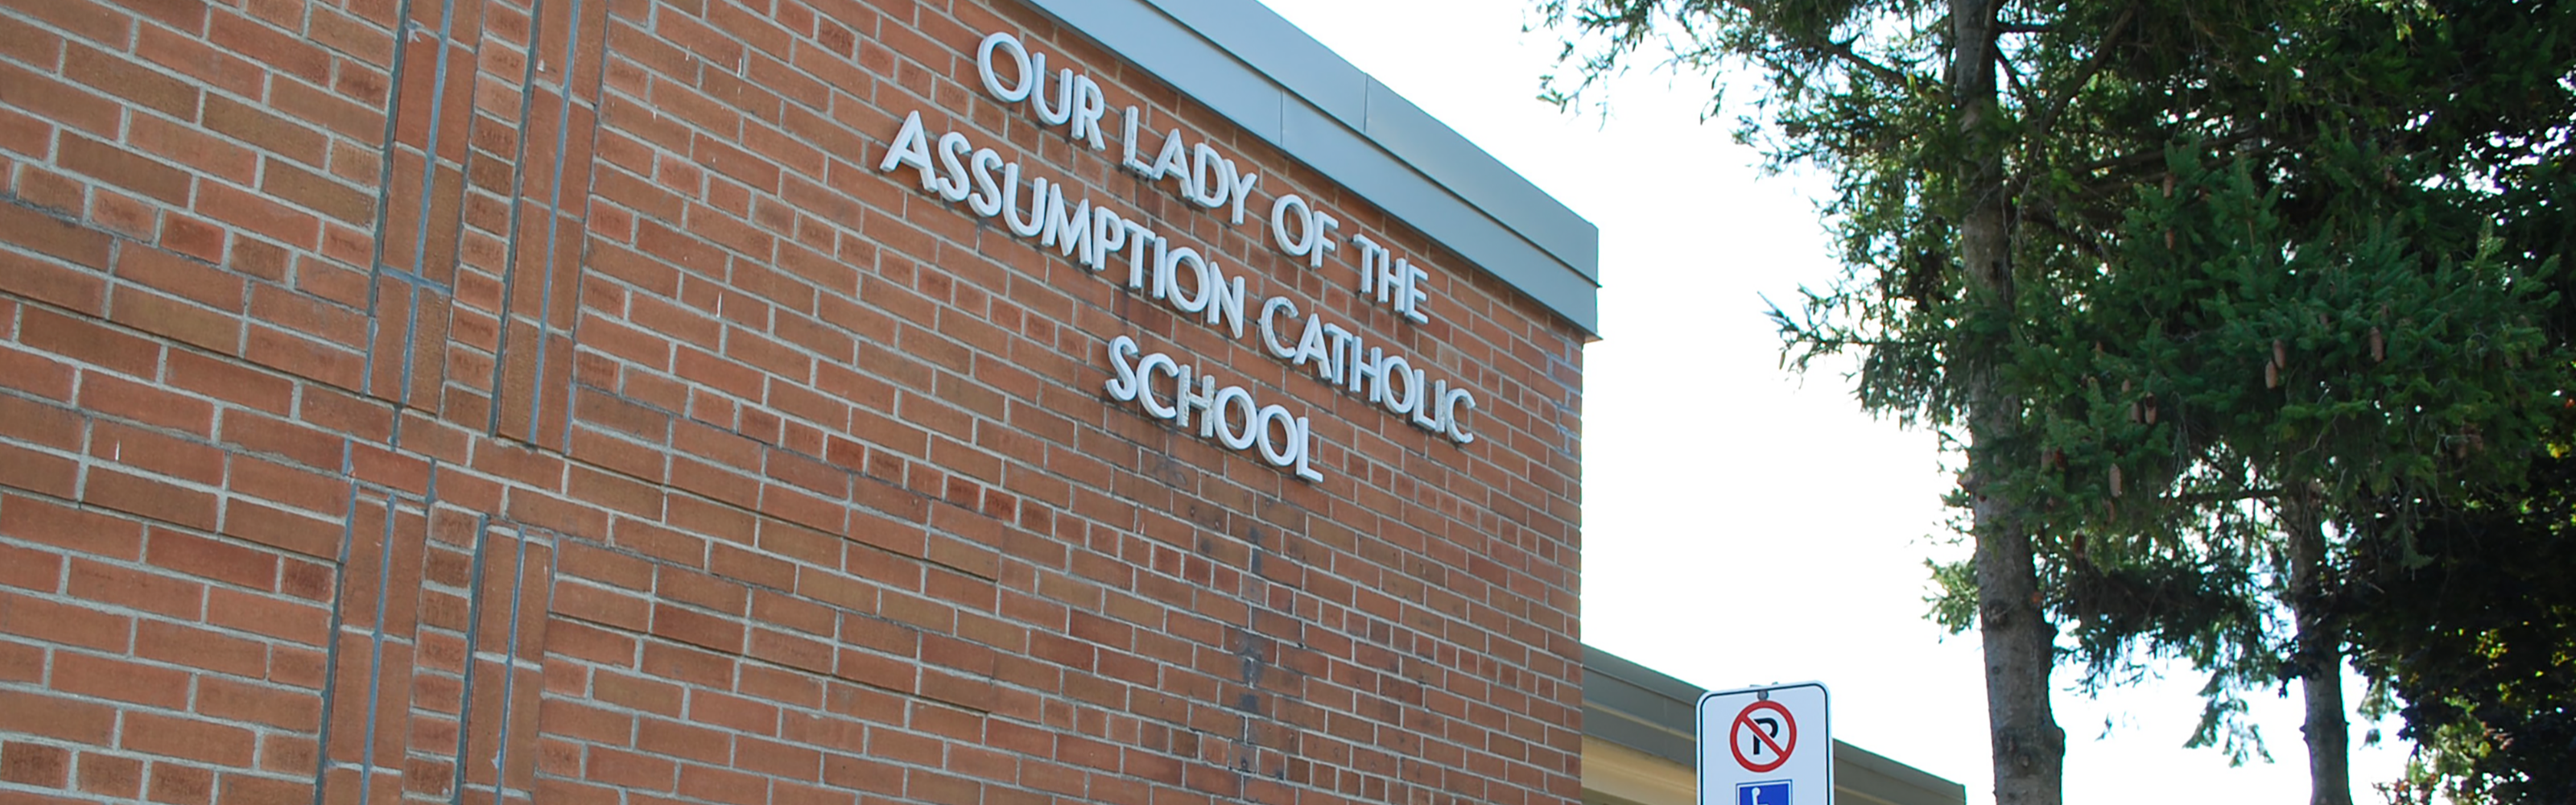 The front of the Our Lady of the Assumption Catholic School building.